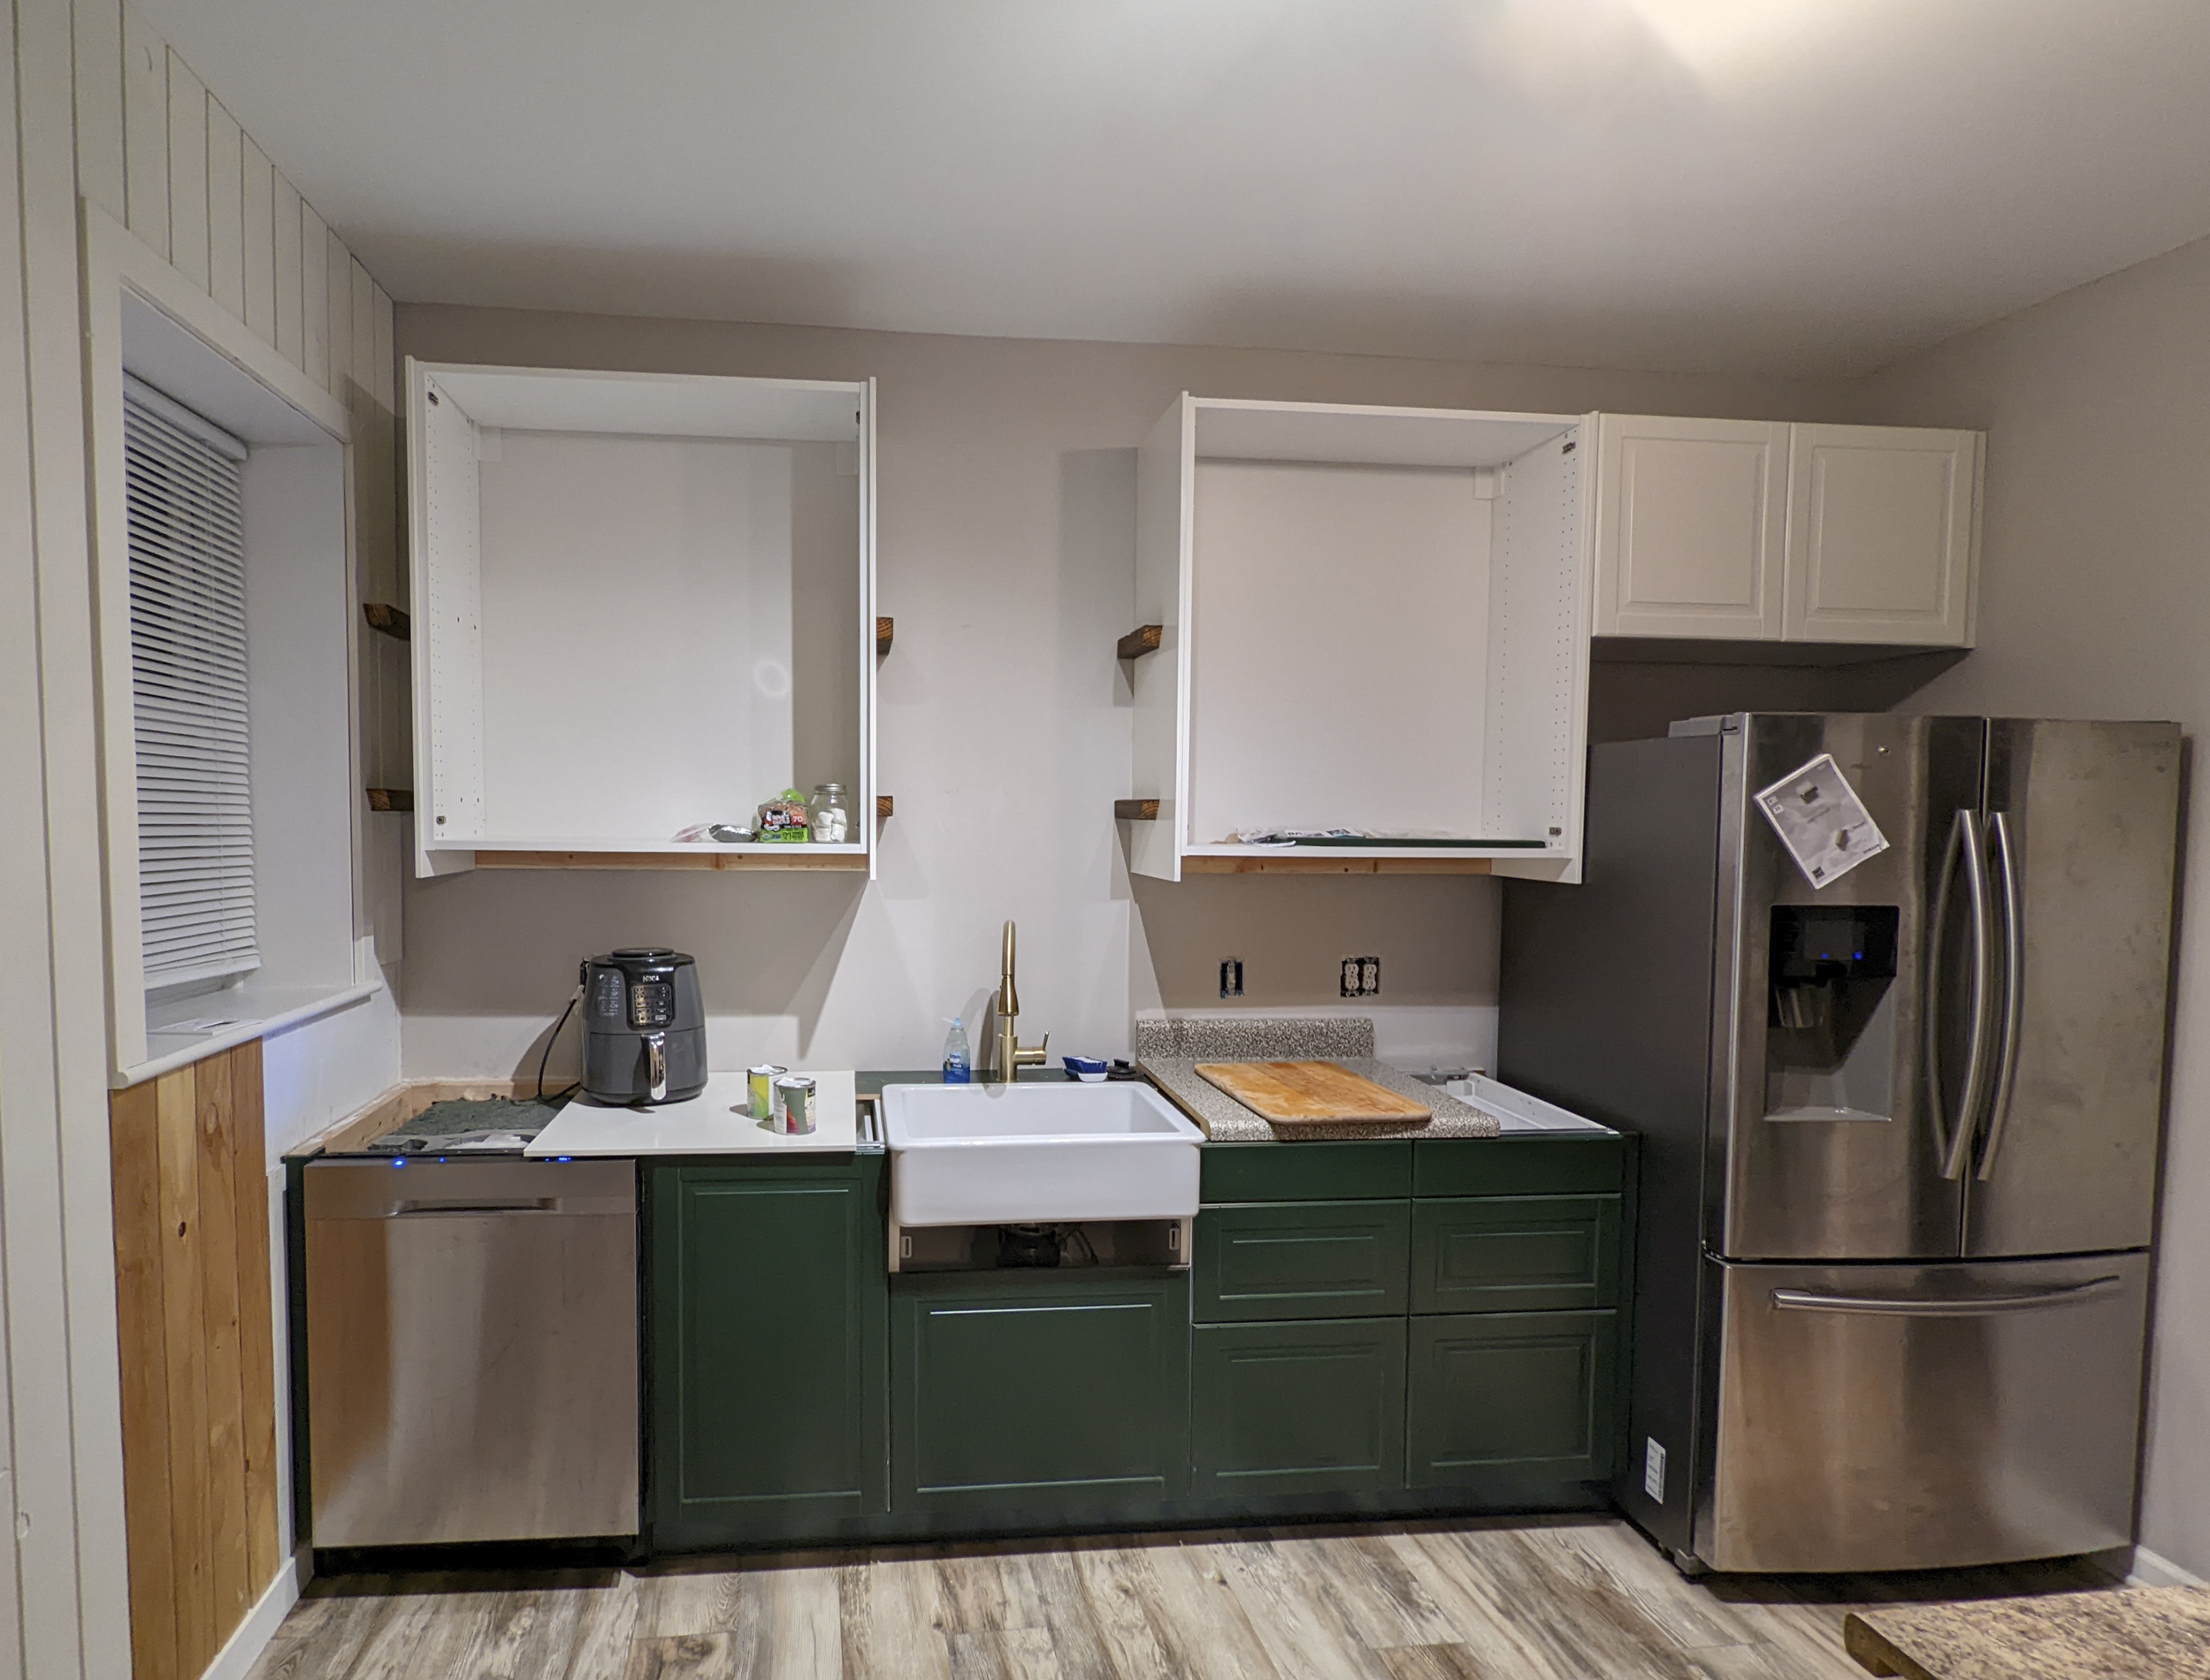 A green IKEA kitchen renovation in progress, shown with half finished cabinets.